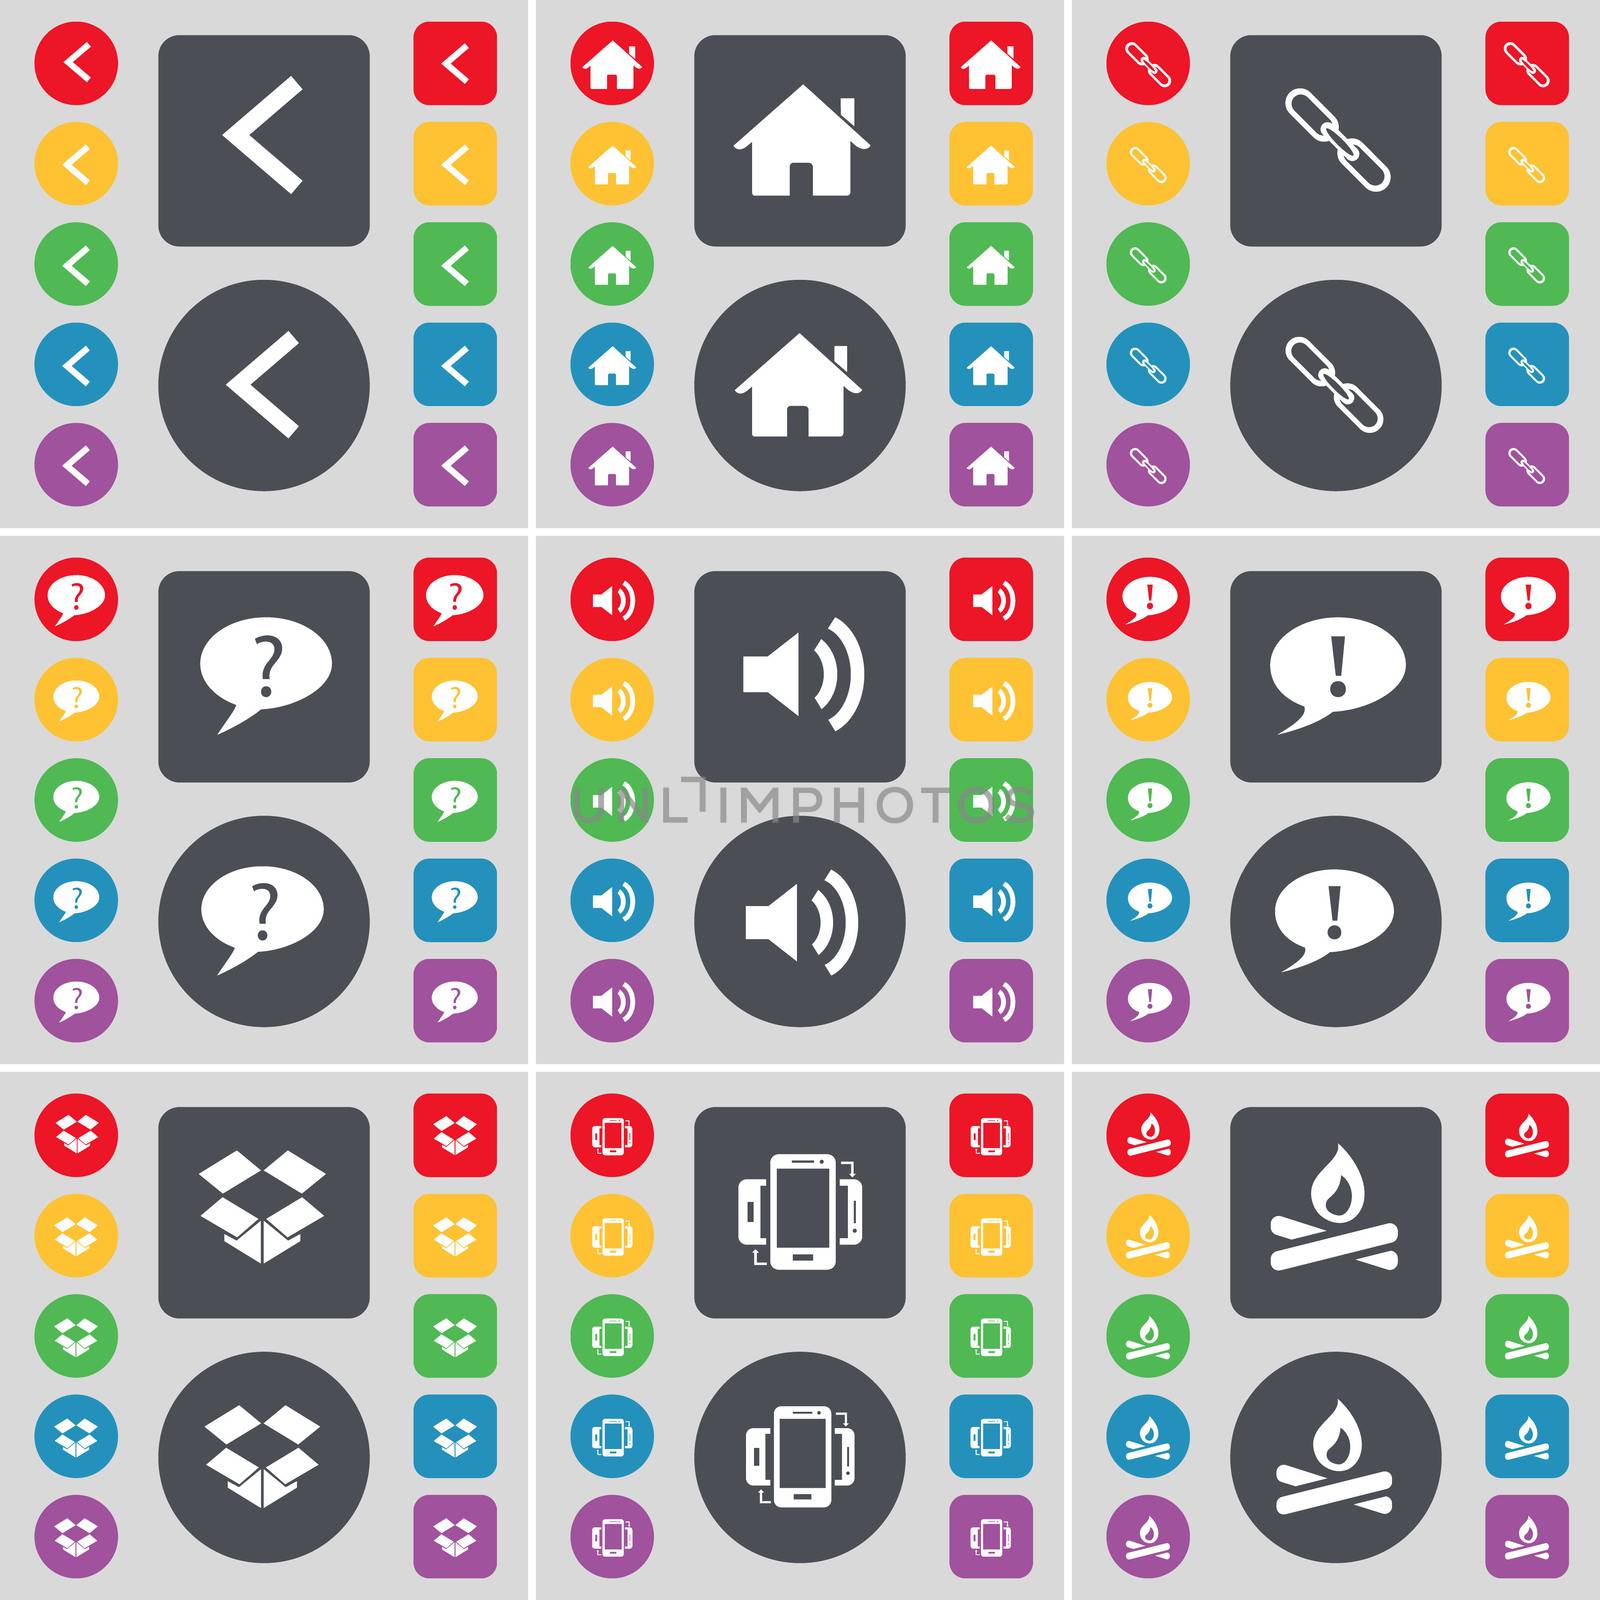 Arrow left, House, Link, Chat bubble, Sound, Dropbox, Smartphone, Campfire icon symbol. A large set of flat, colored buttons for your design. illustration